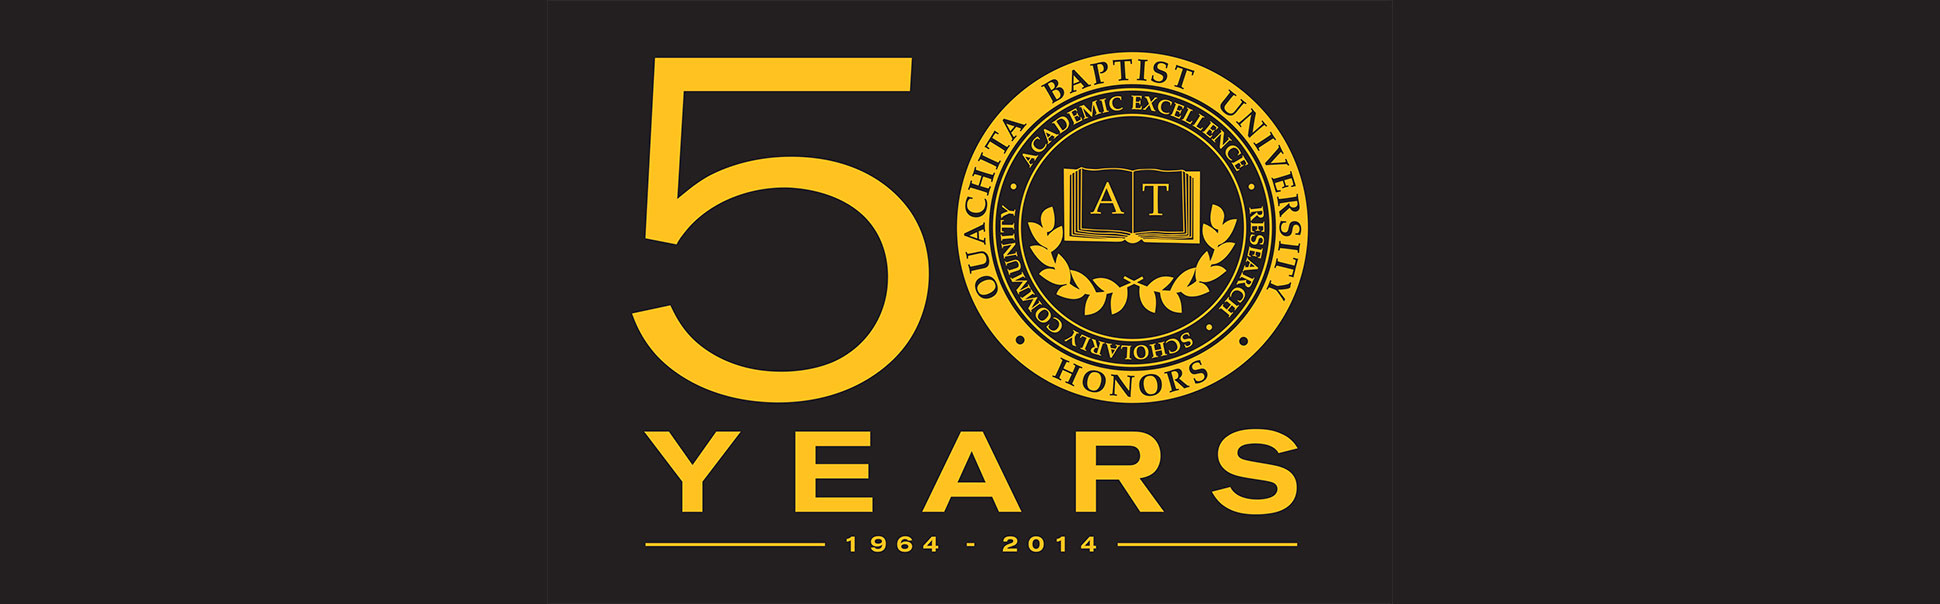 Carl Goodson Honors Program celebrates 50 years of academic excellence.